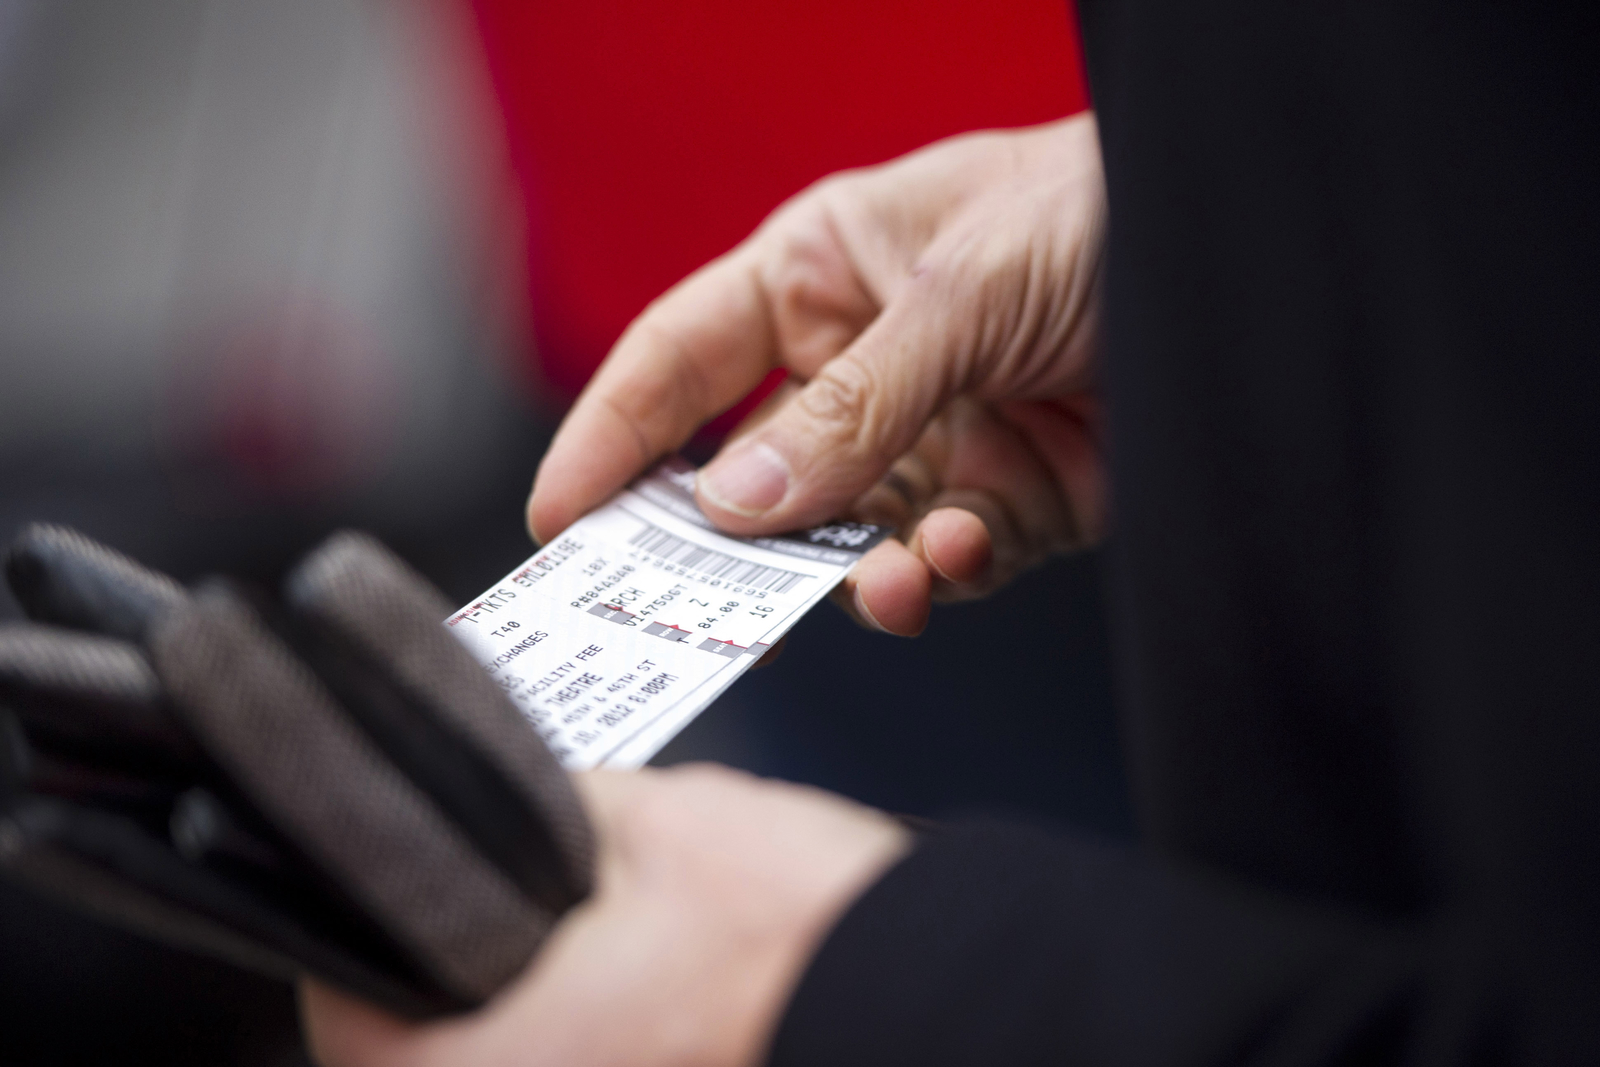 Don’t let fraudsters ruin your next concert, sports event [Video]